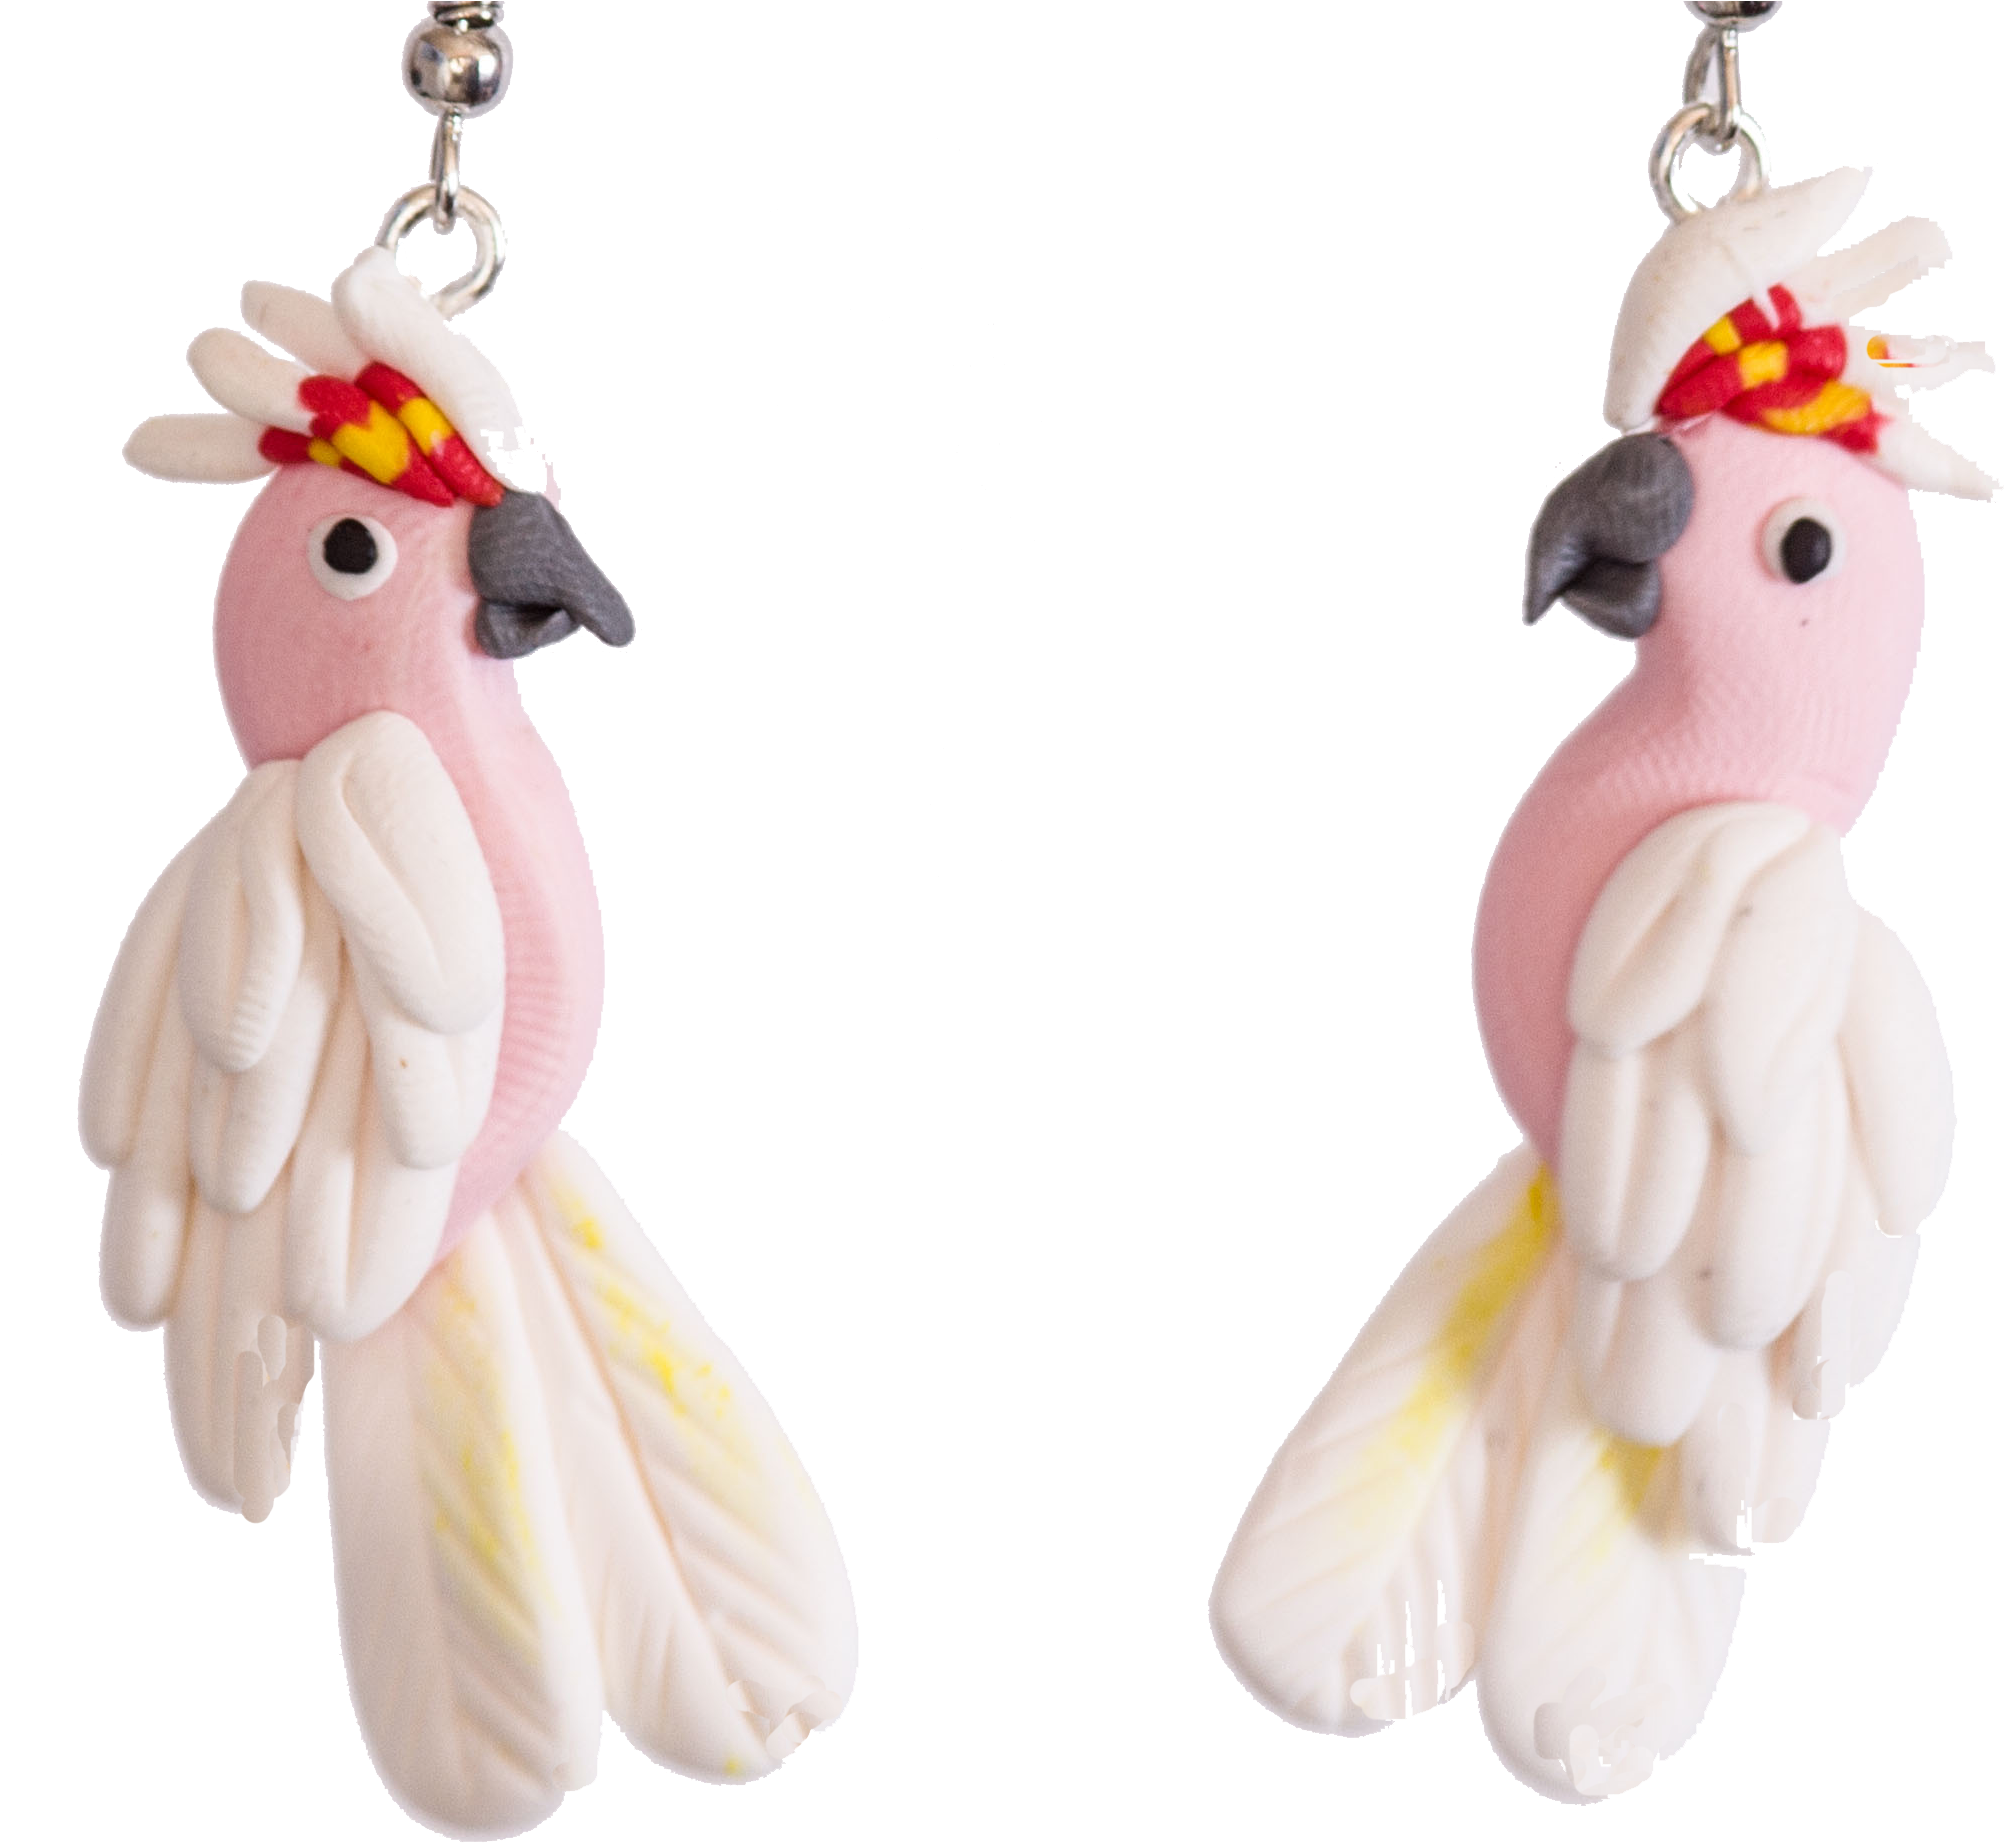 A Pair Of Earrings With Parrots